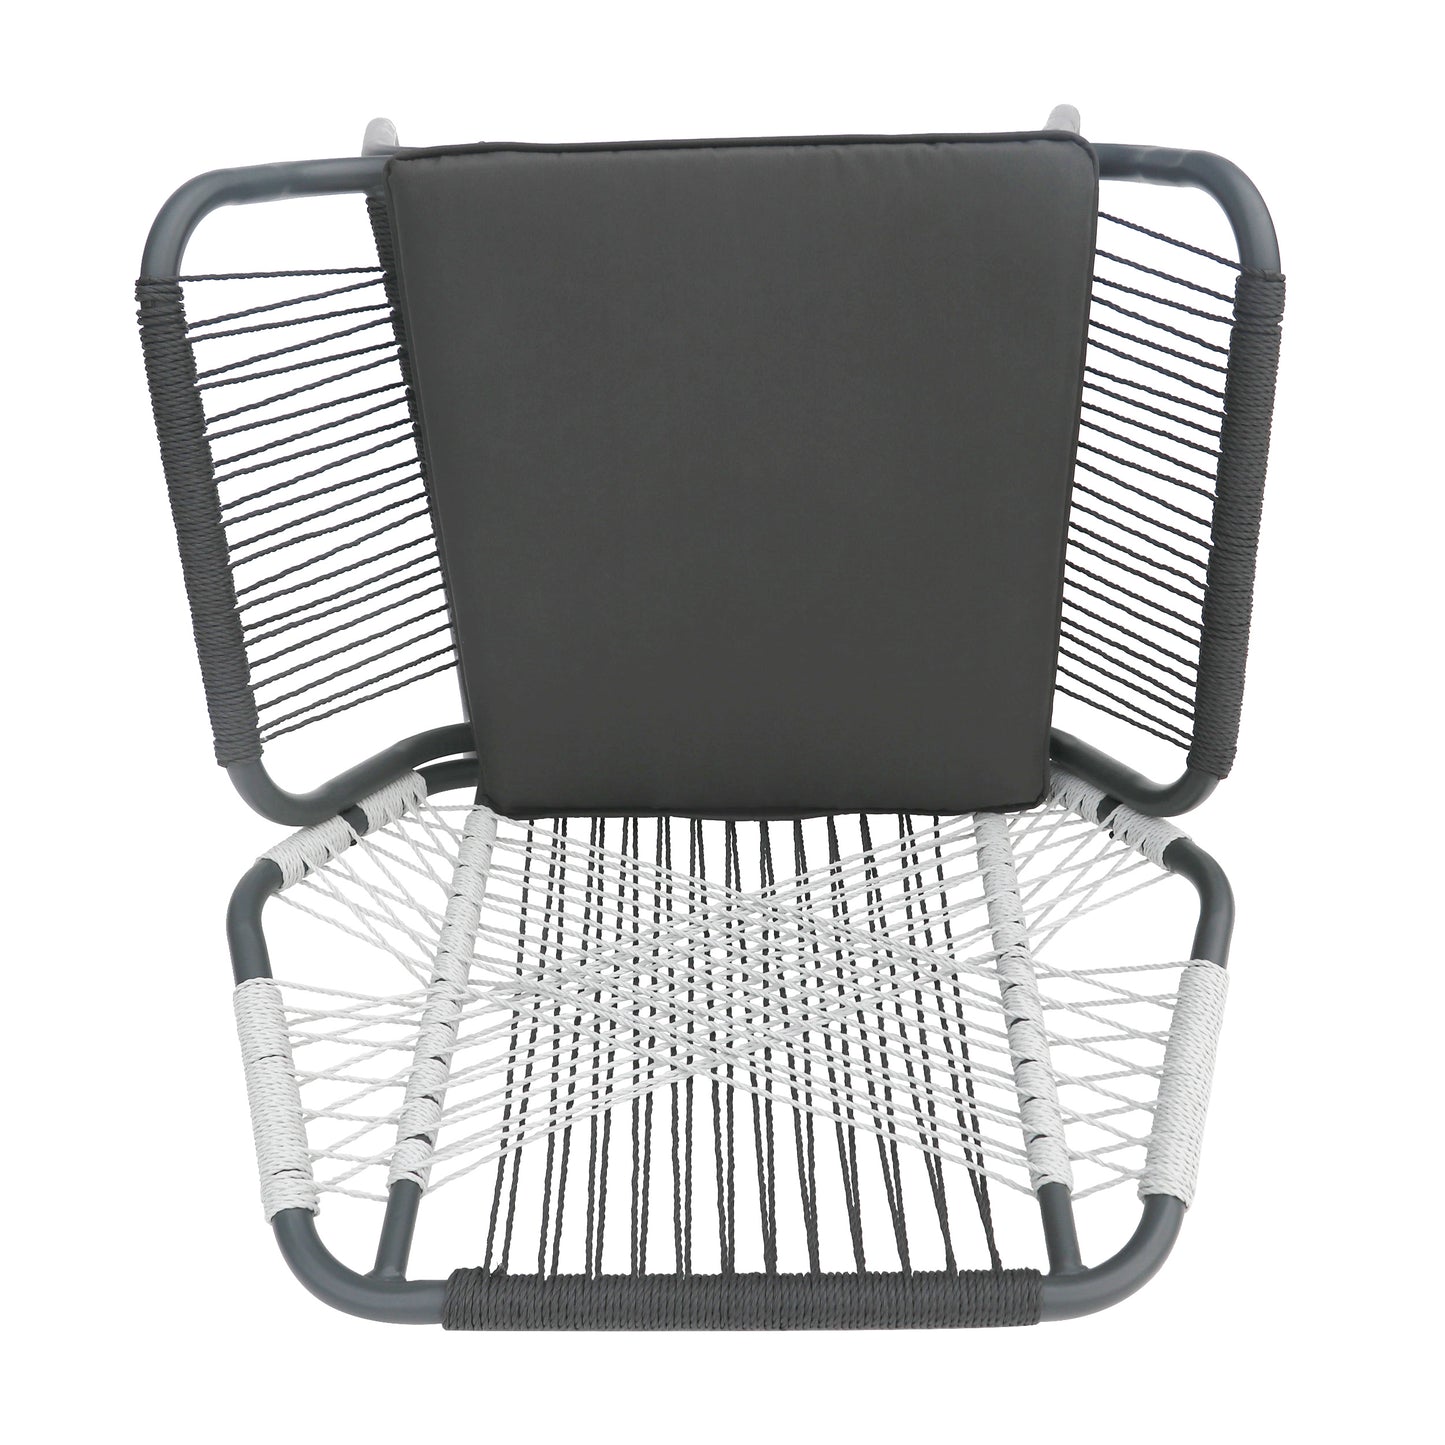 Gloria Outdoor Rope and Steel Club Chairs (Set of 2)